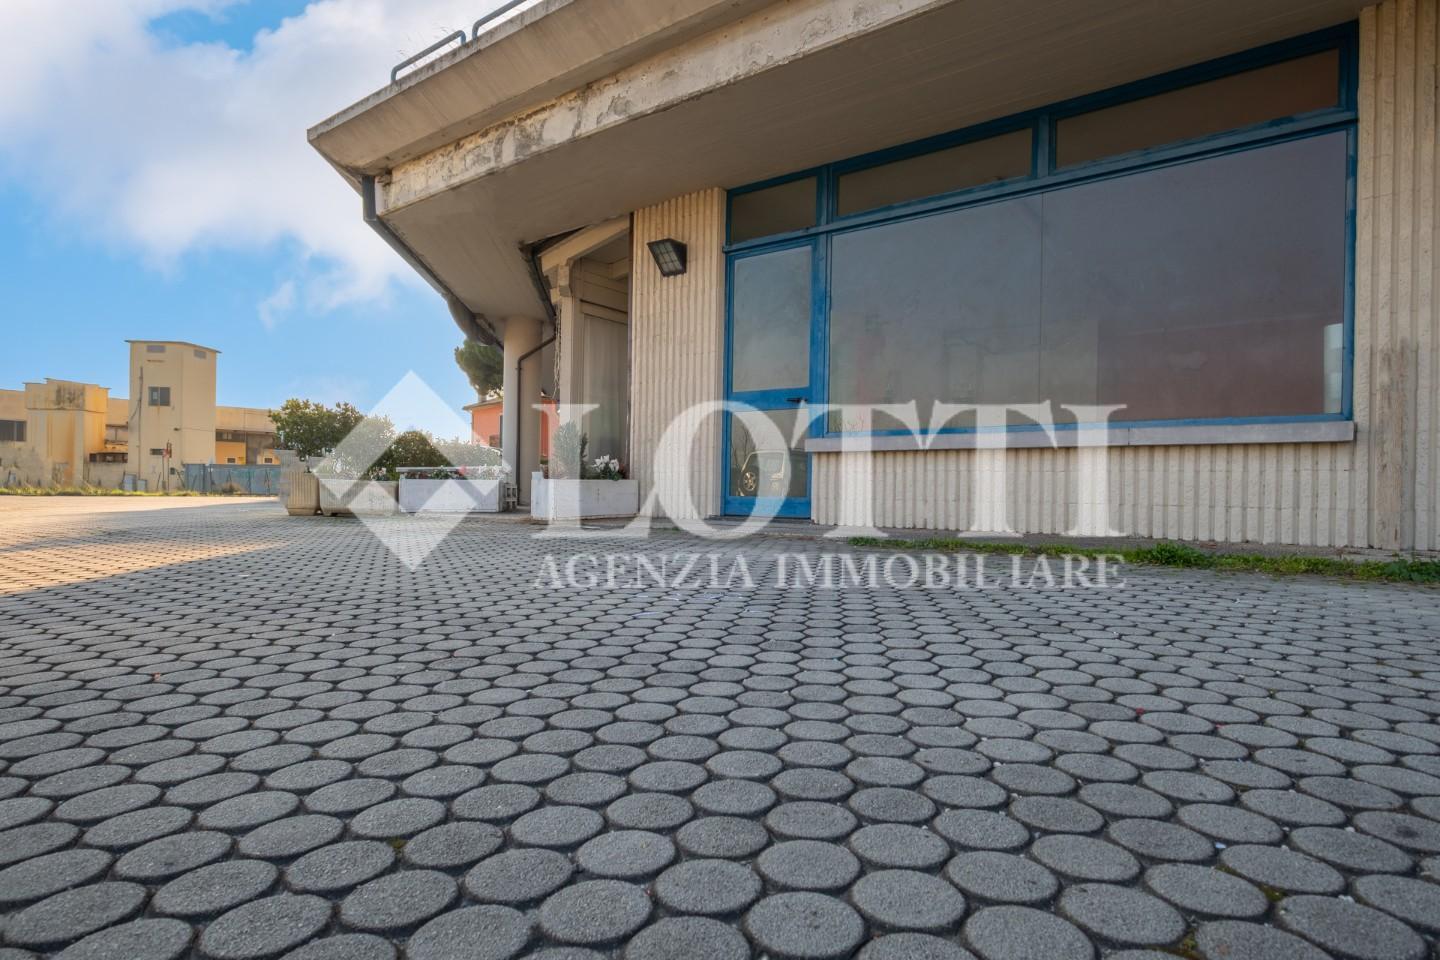 Business mall for commercial rentals in Bientina (PI)